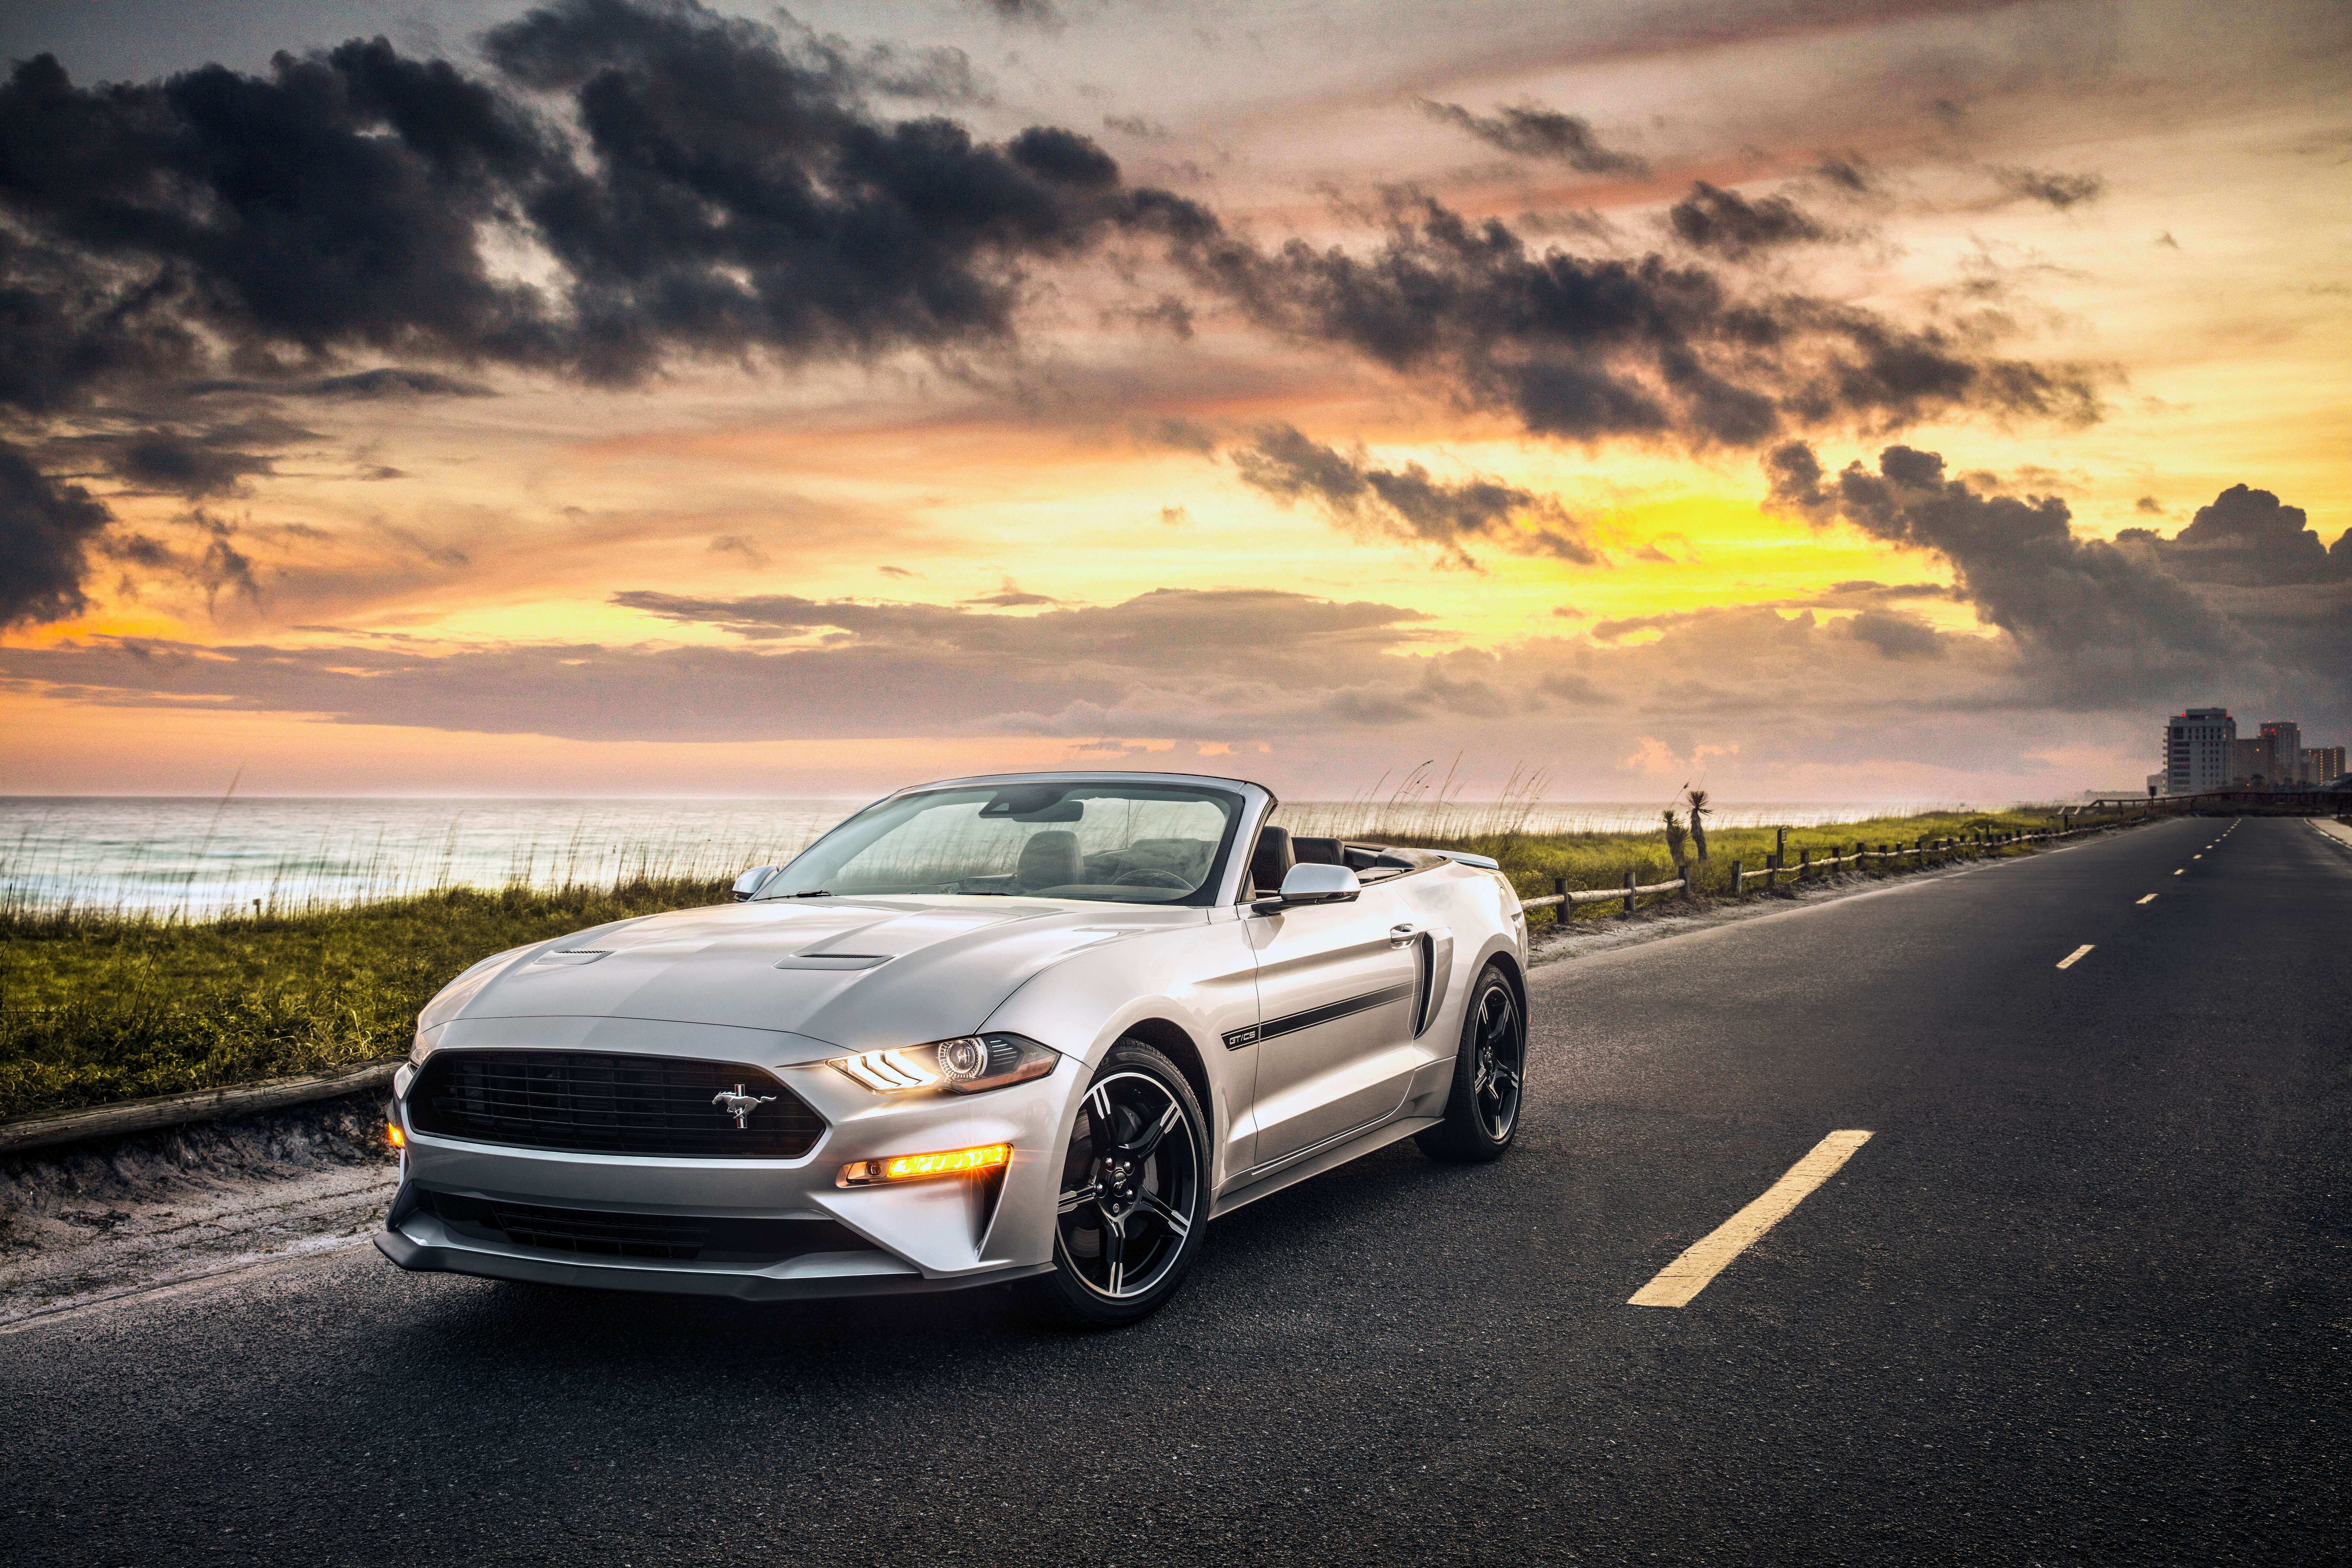 Ford Released the 2019 Mustang California Special